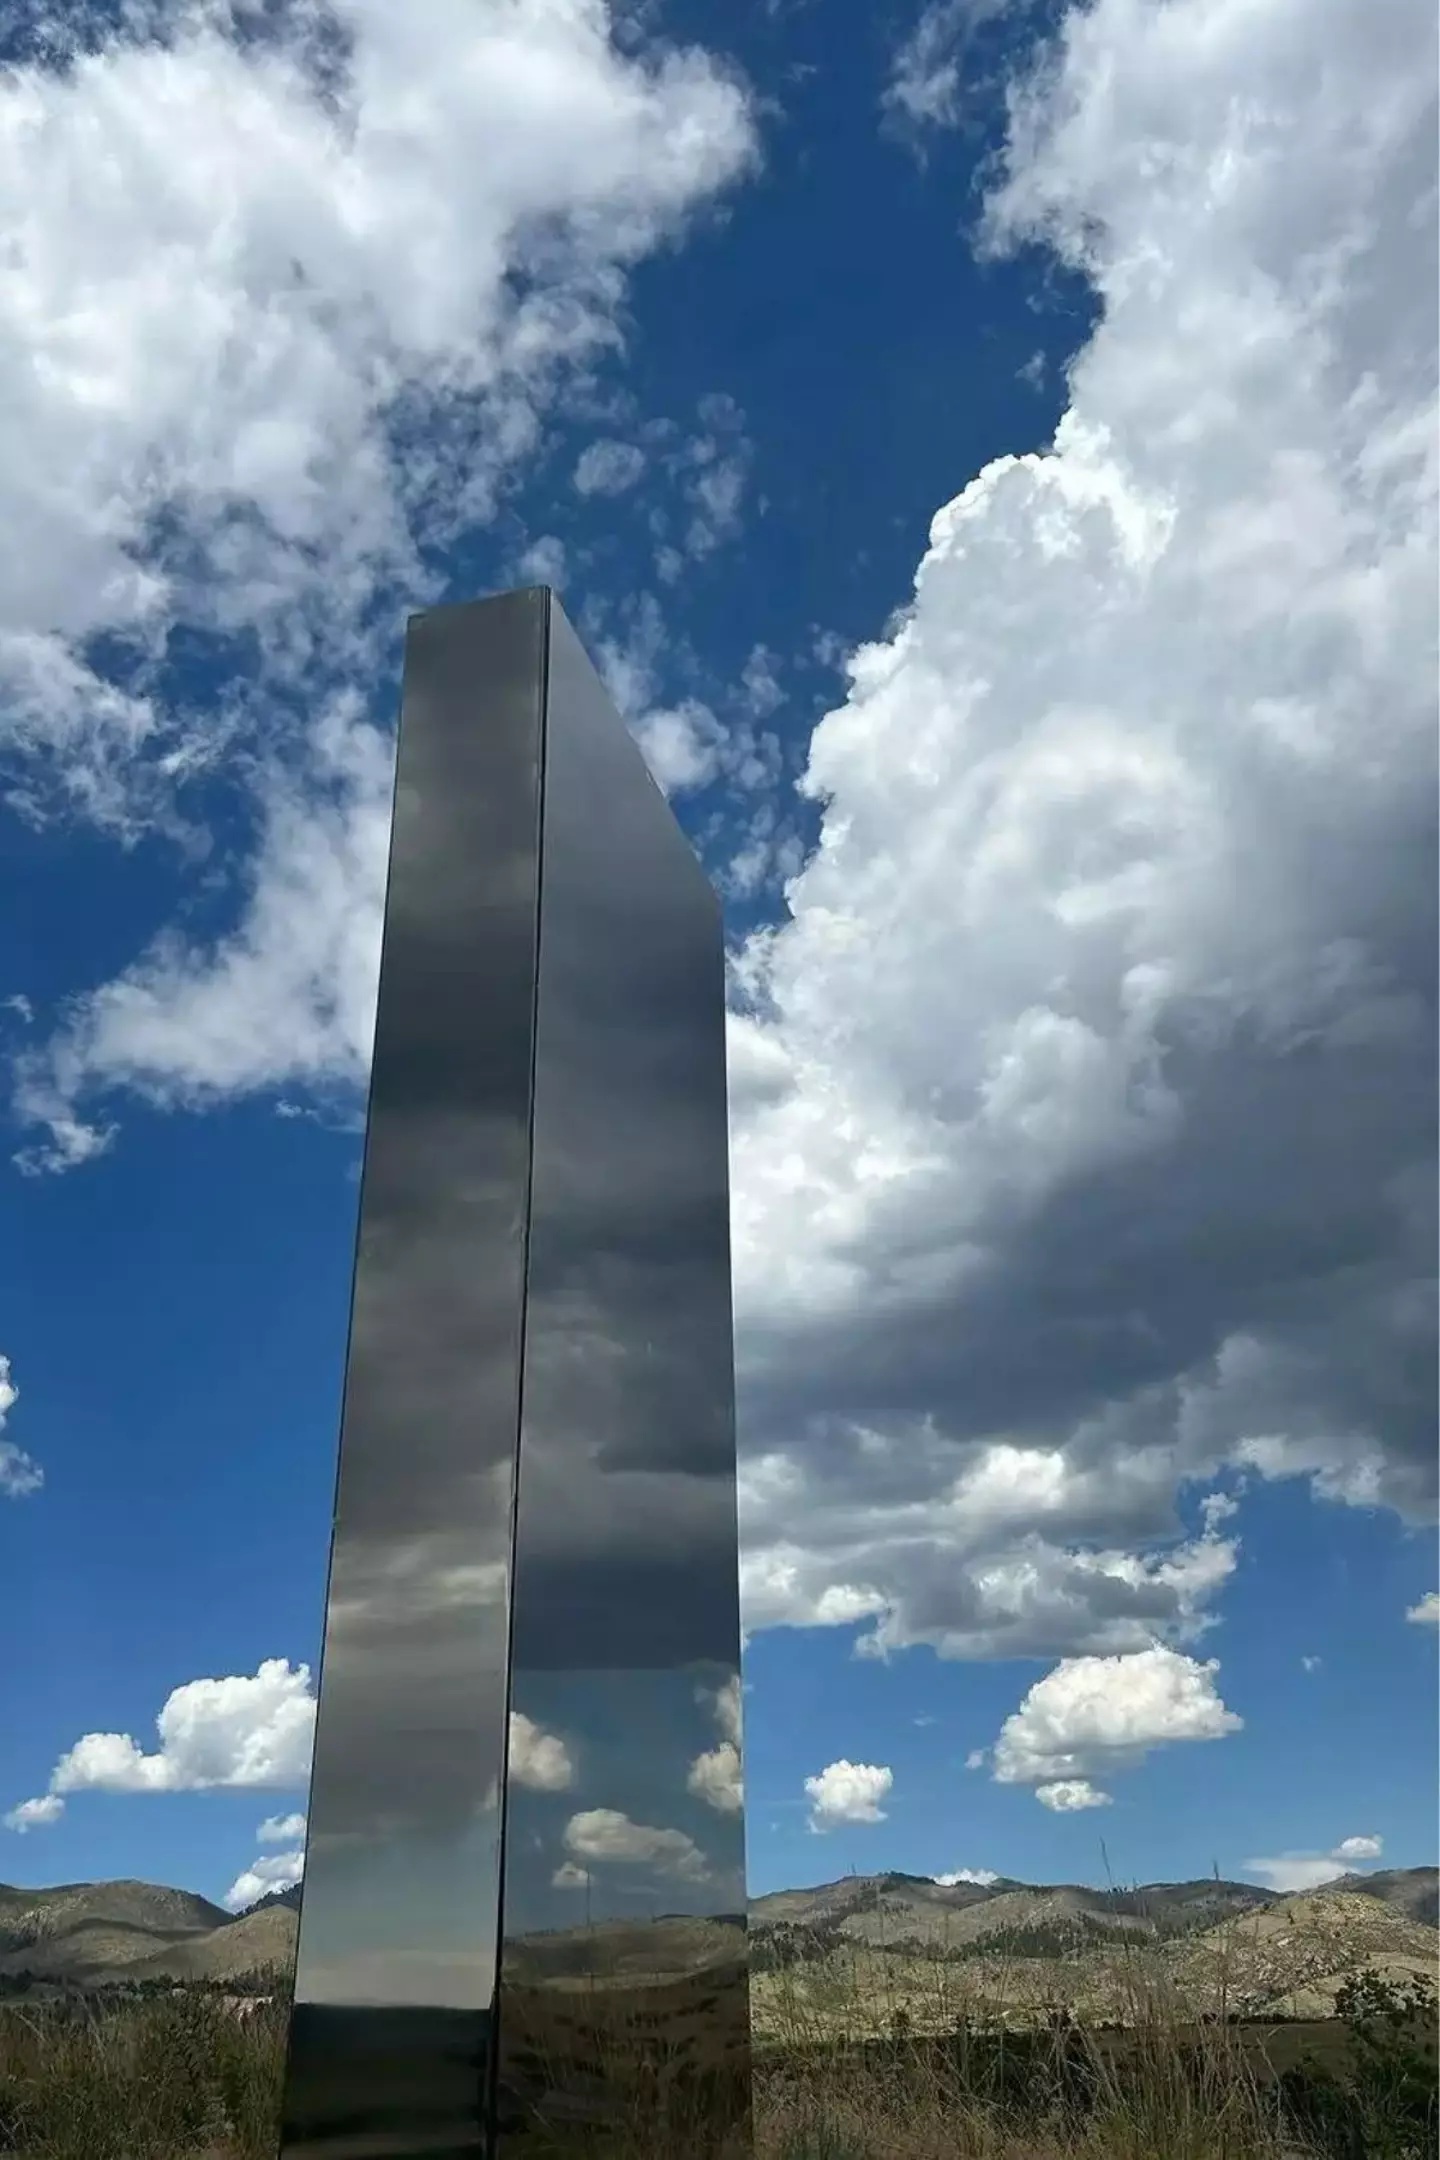 No connection between the first and second monoliths have been confirmed. (howlingcowcafe/Instagram)